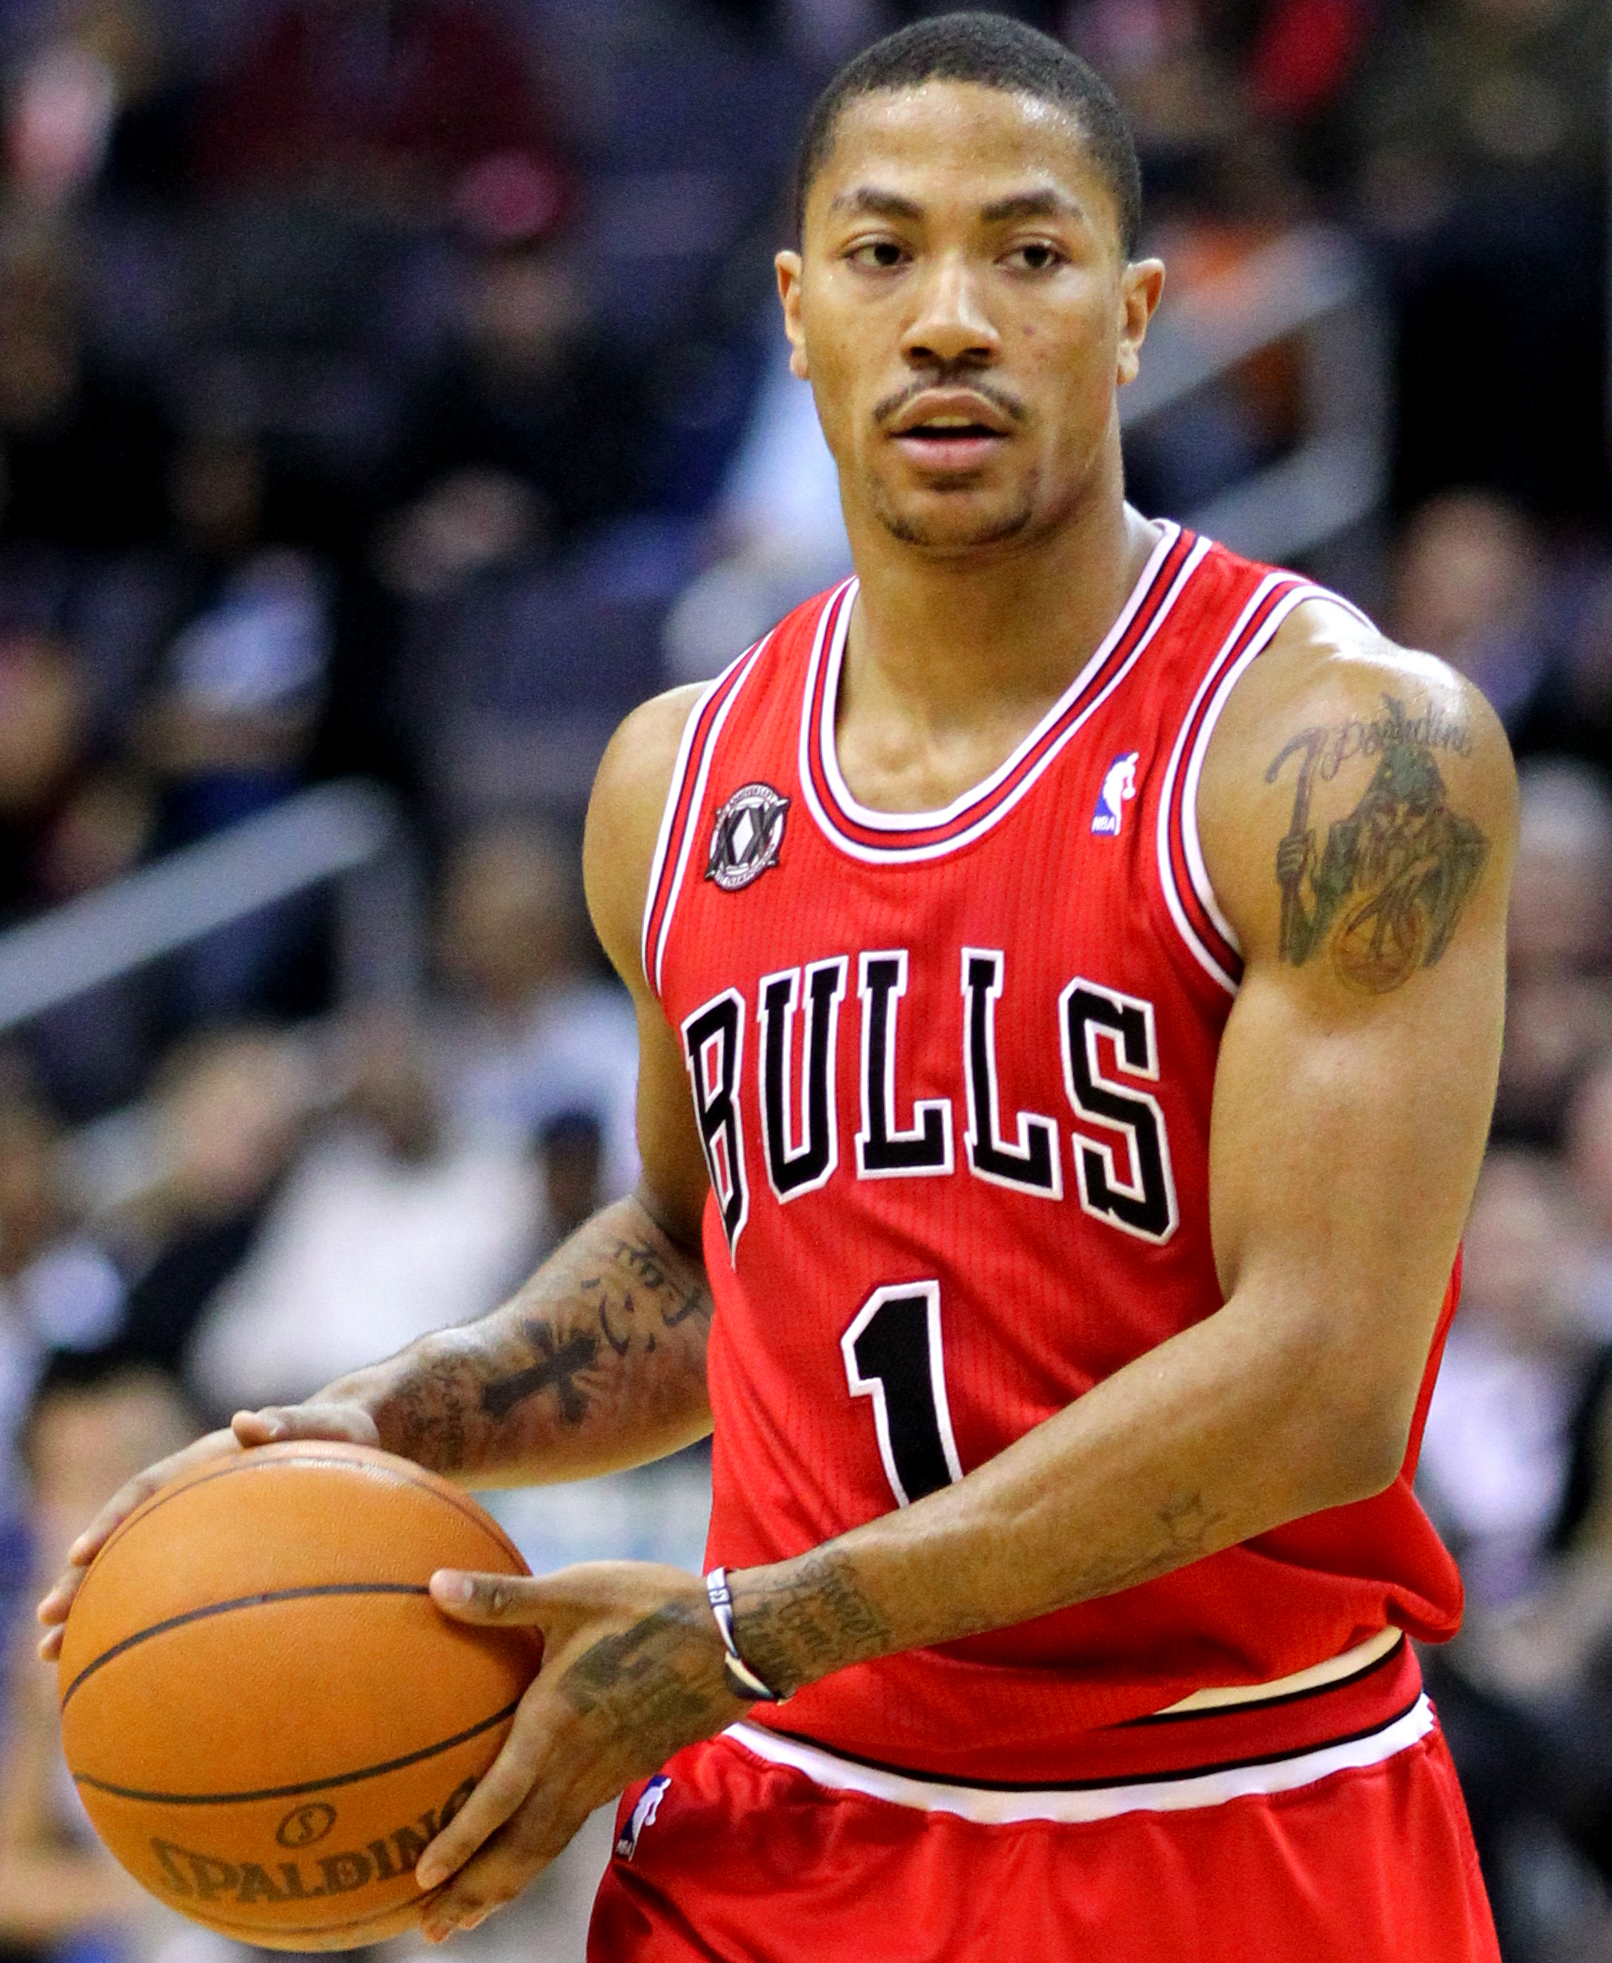 Derrick Rose to join Knicks after trade